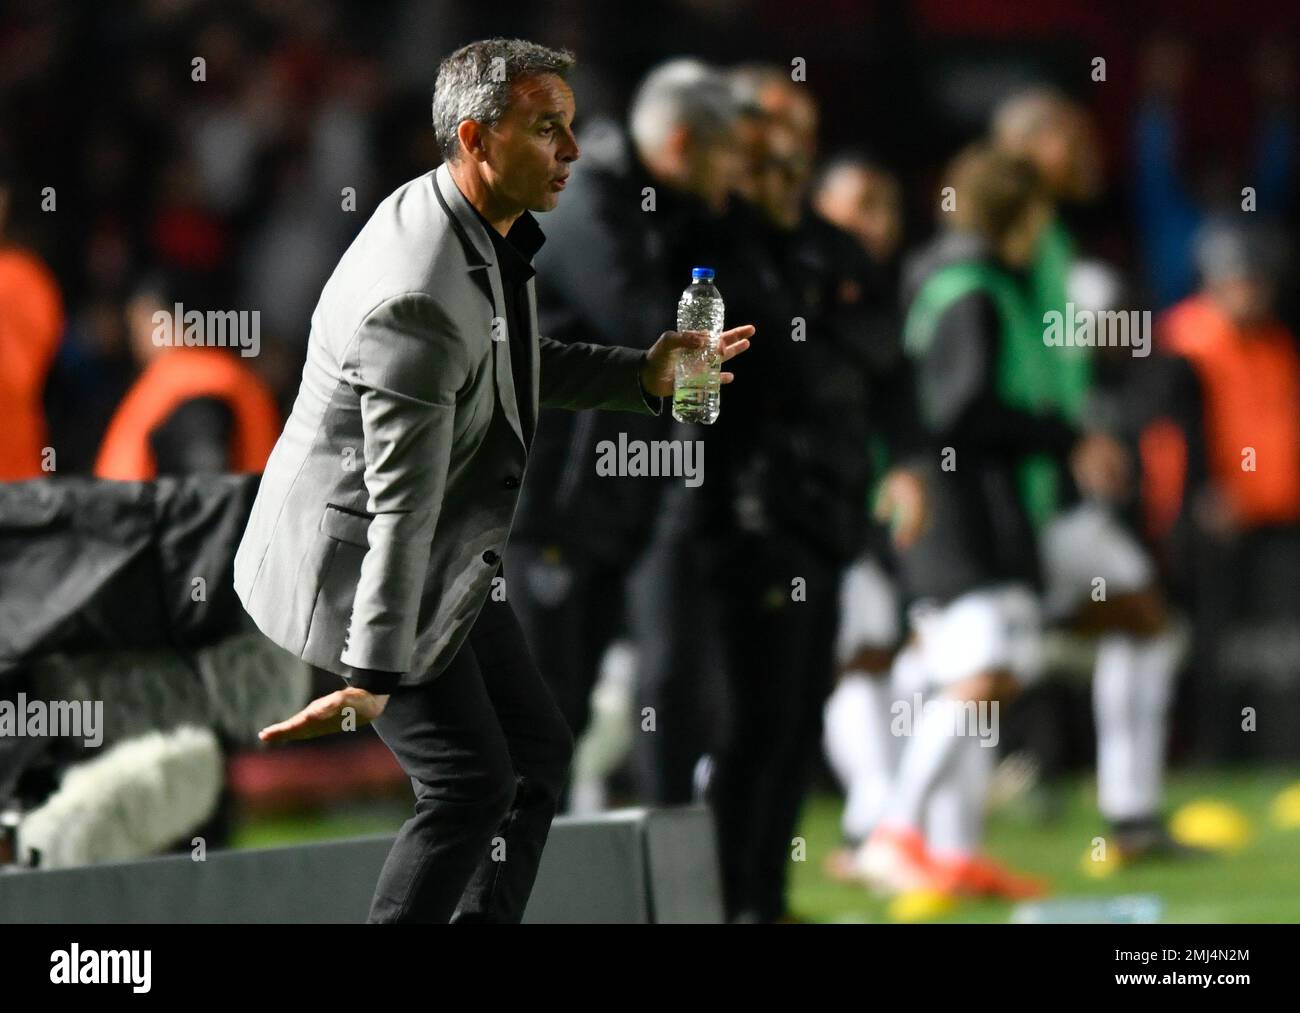 Pablo Lavallen, coach of Argentina's Colon, gives instructions to his  players during a semifinal first leg Copa Sudamericana soccer match against  Brazil's Atletico Mineiro at the Brigadier General Estanislao Lopez stadium  in